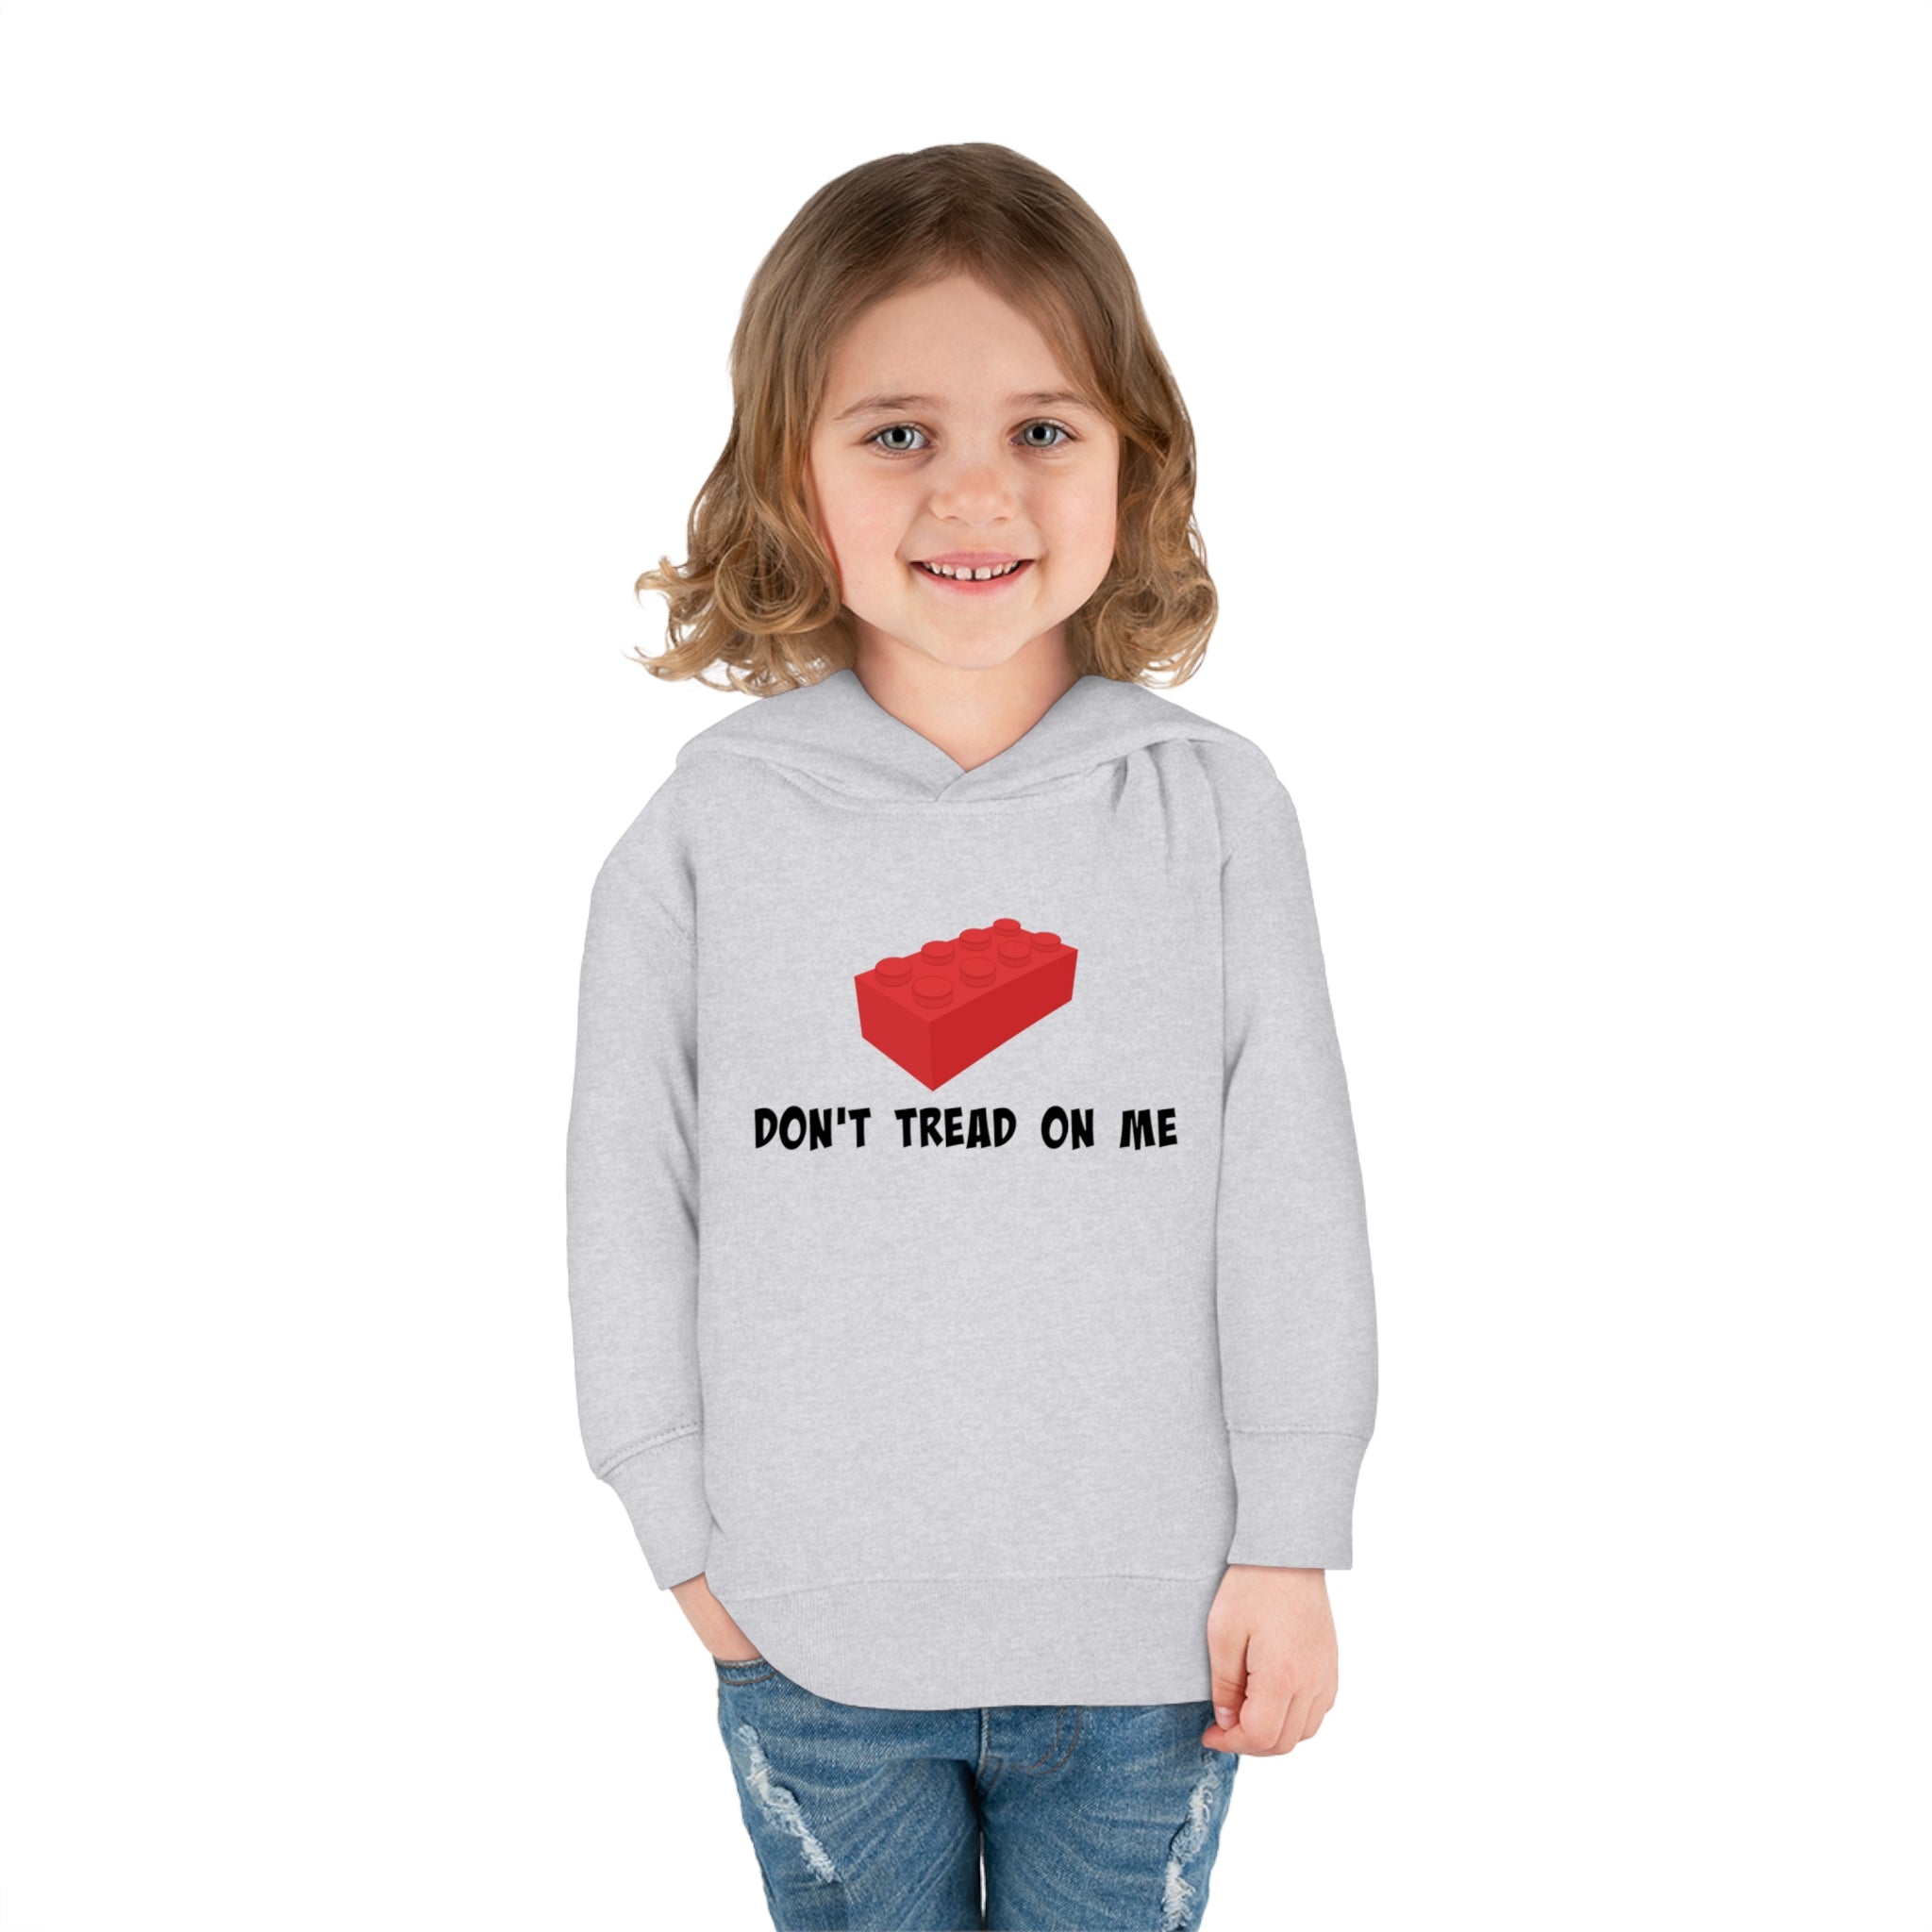 Don't Tread On Me Lego Toddler Pullover Fleece Hoodie